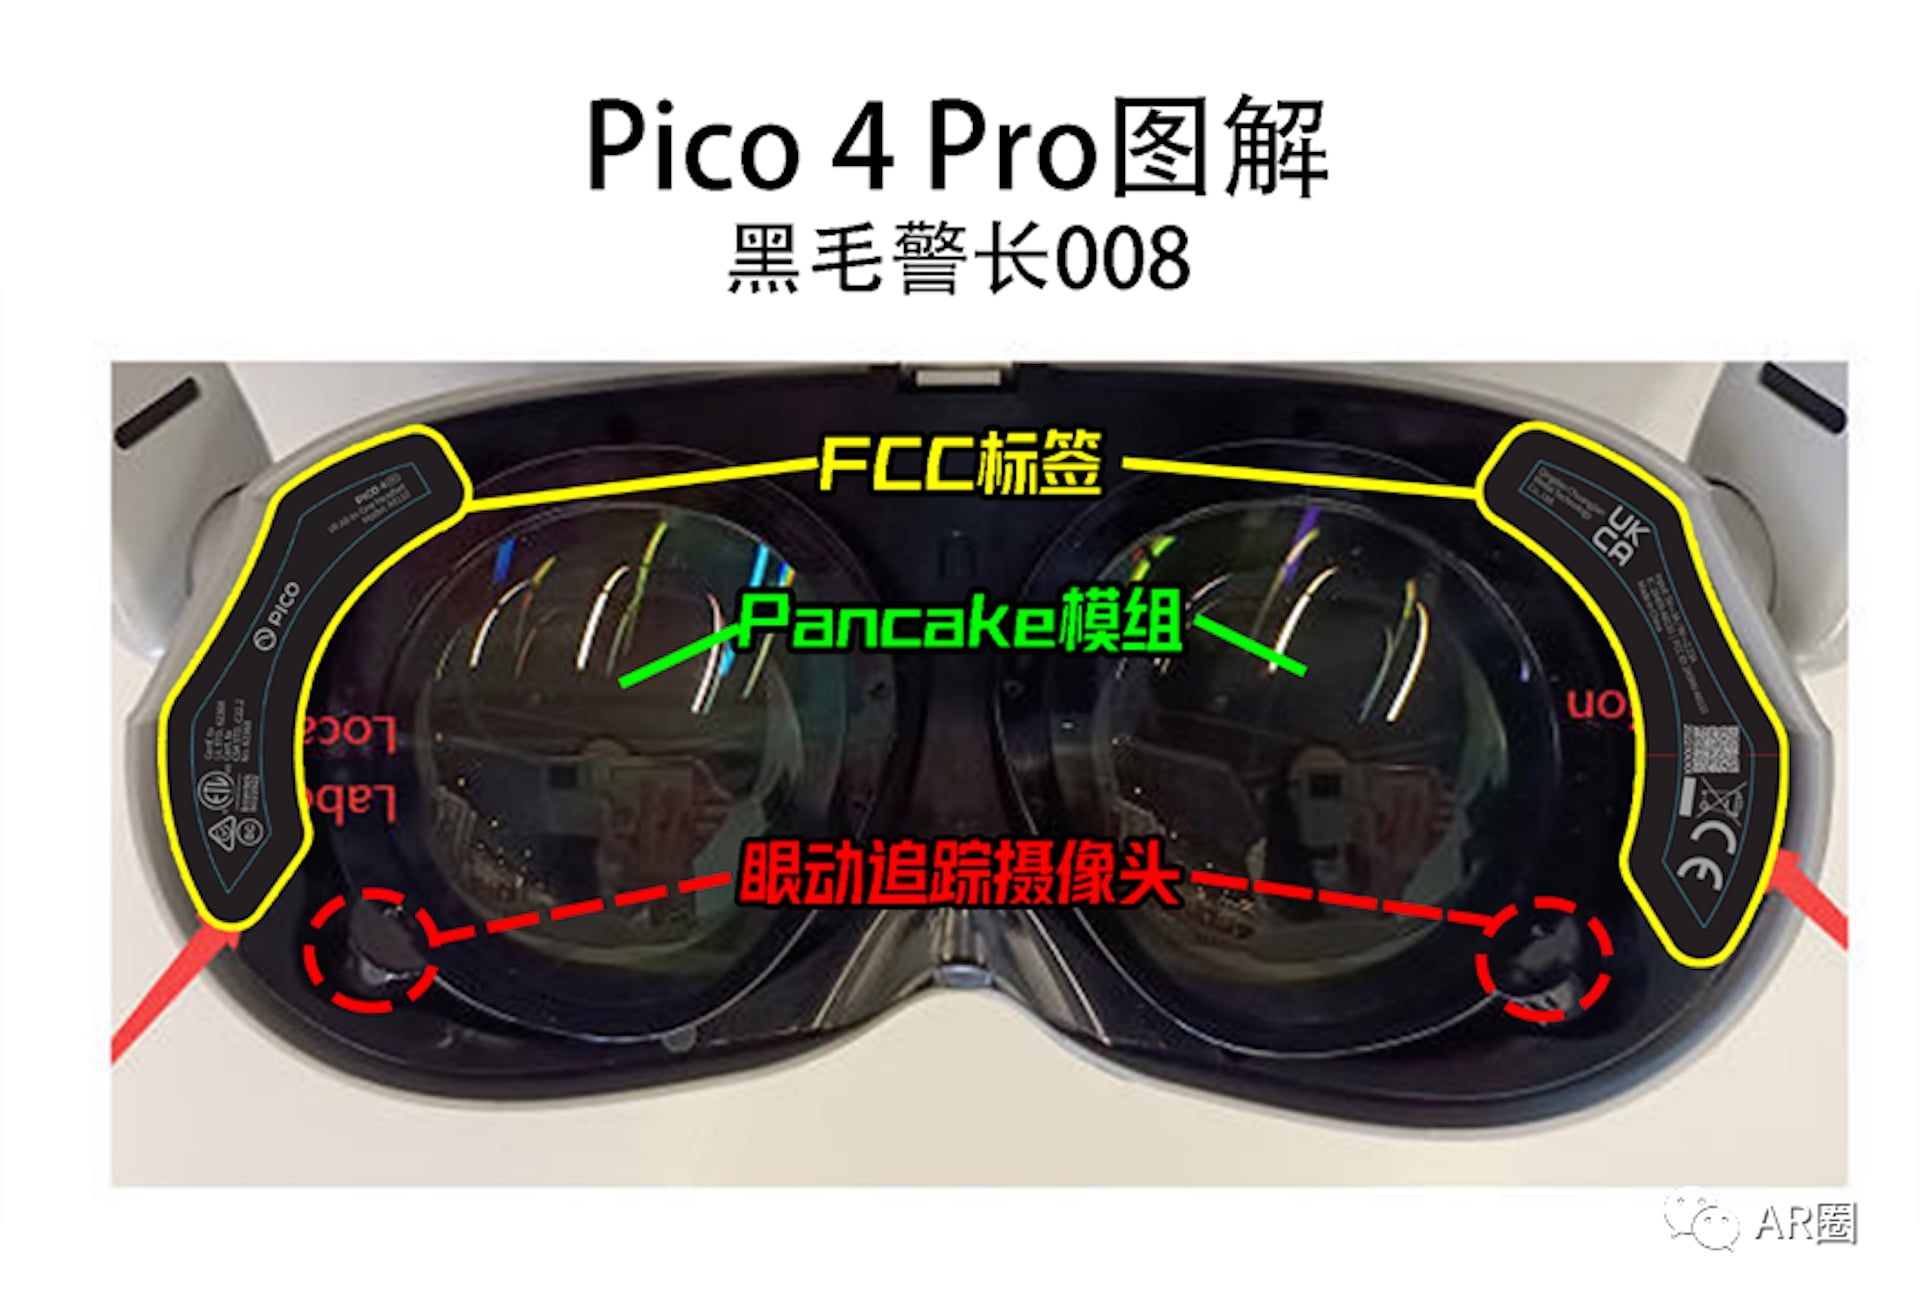 Pico 4 Pro: What we know about the professional device